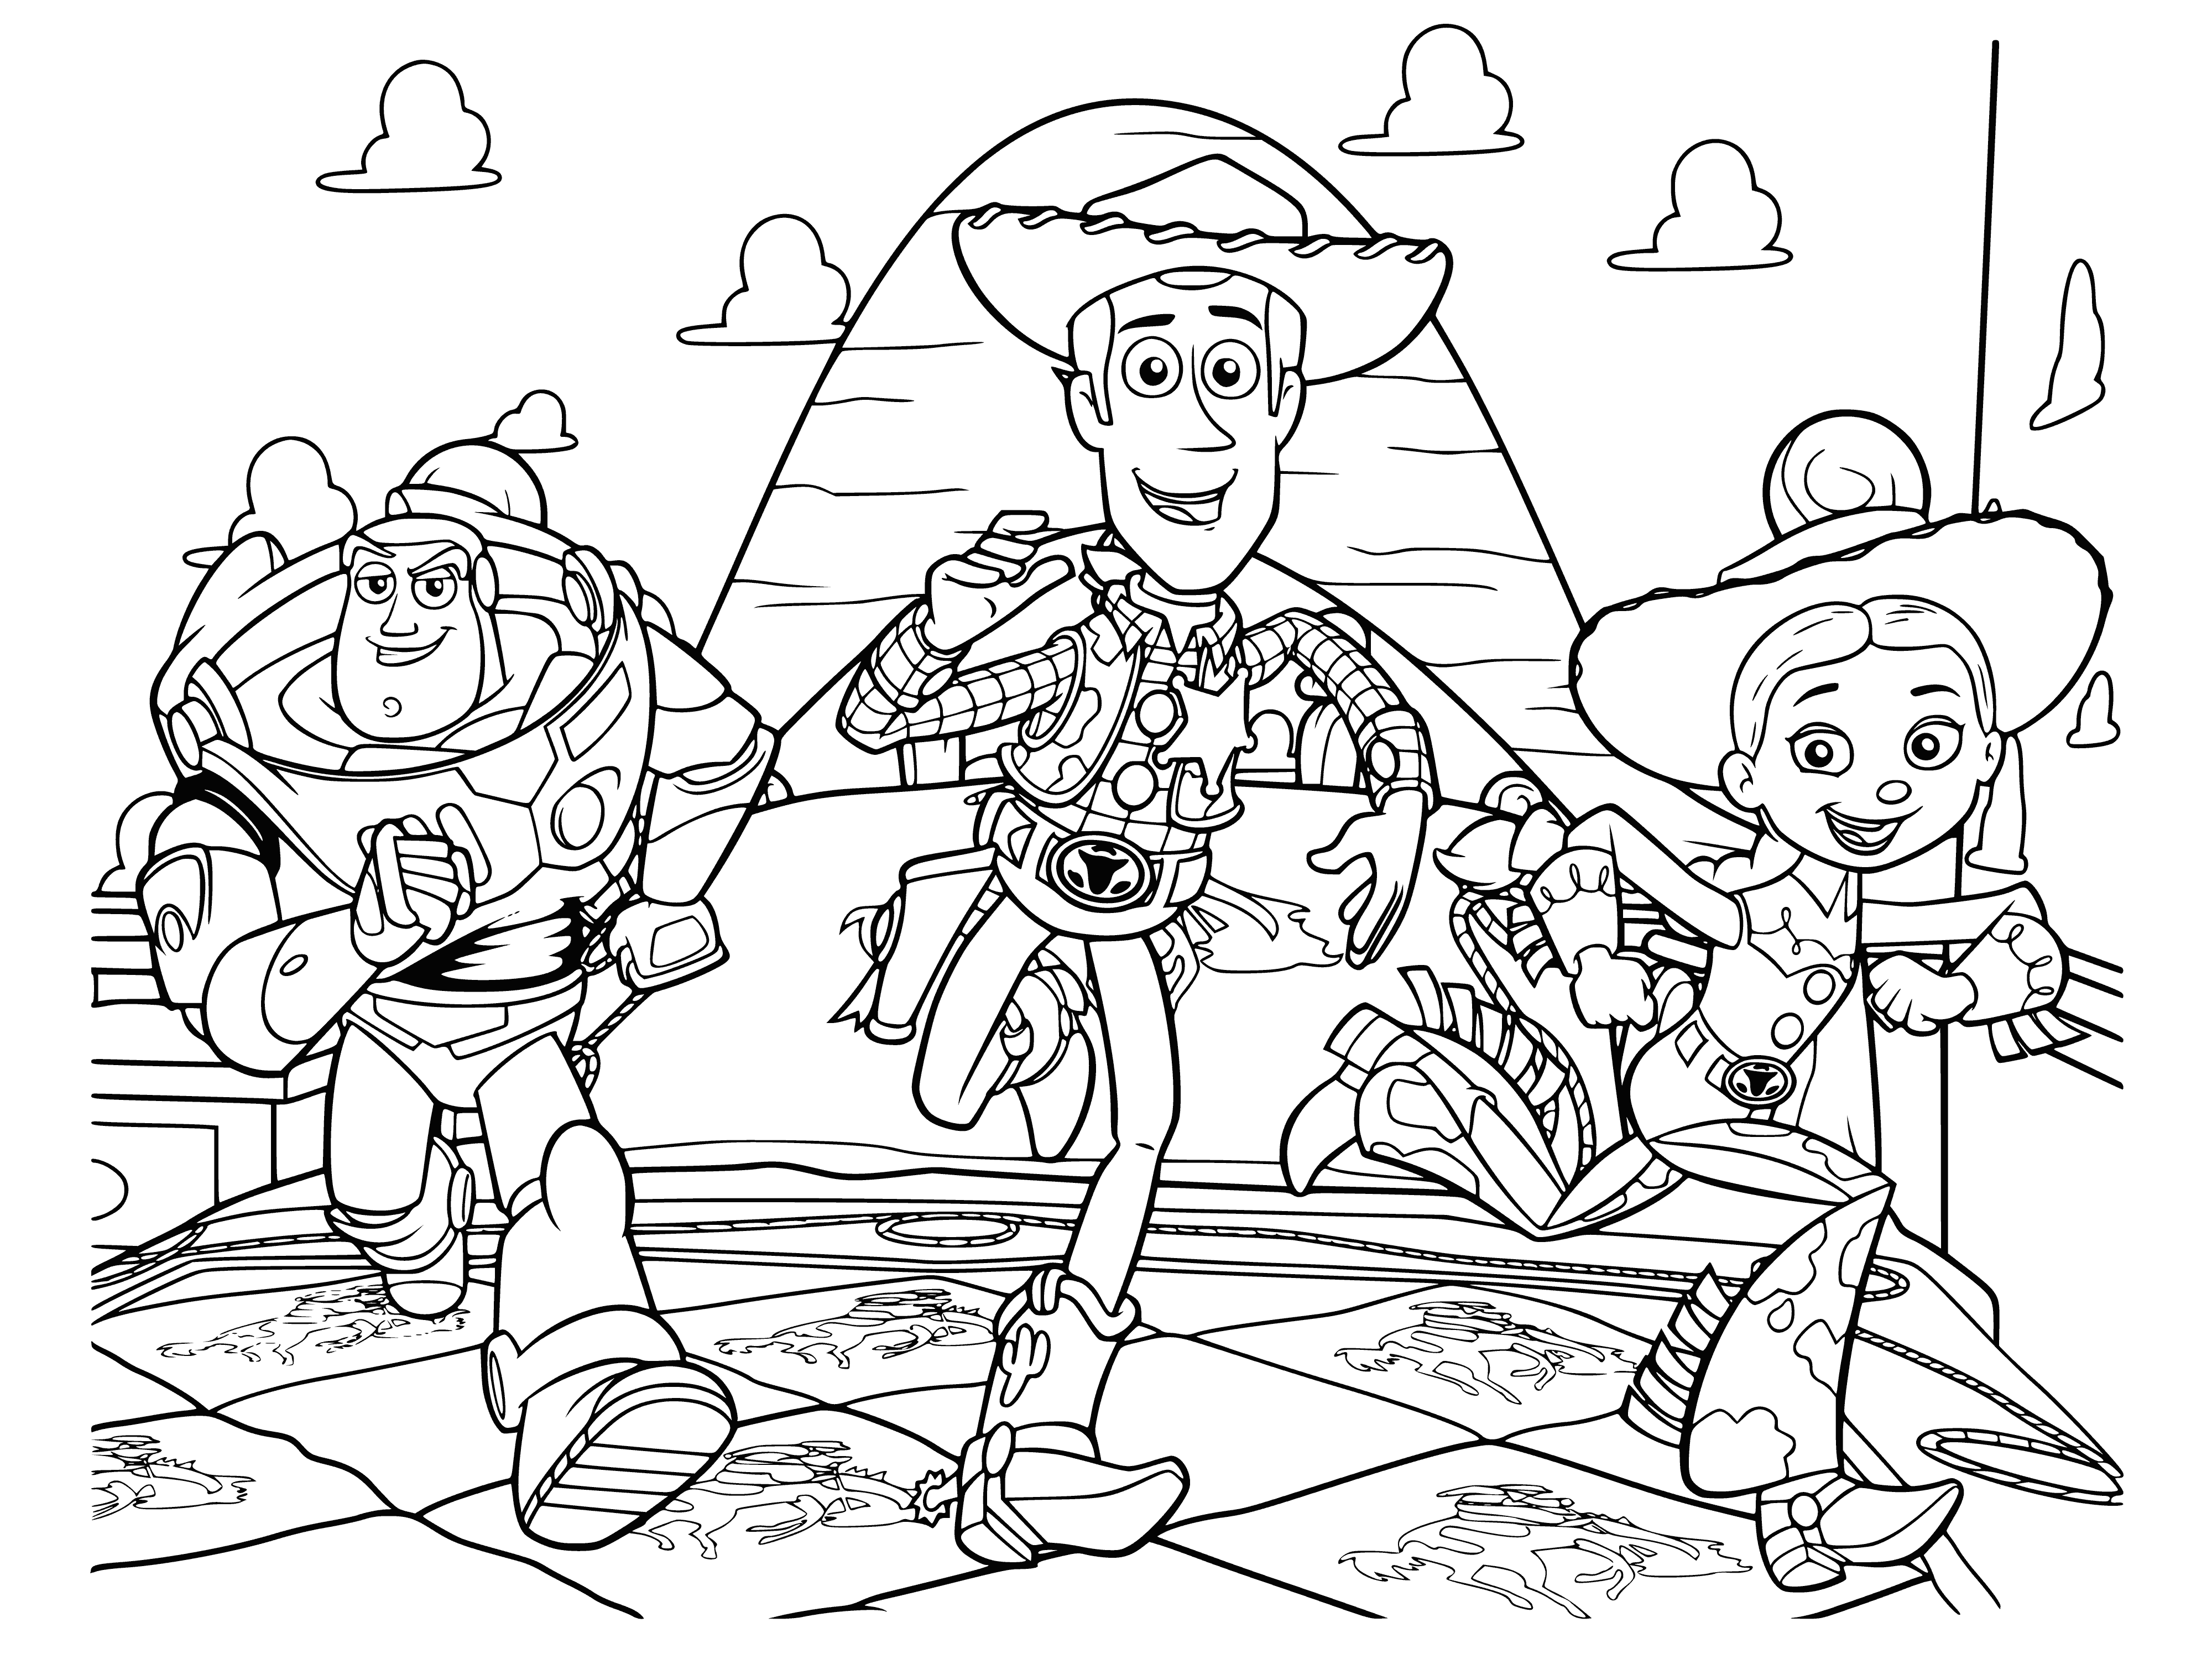 coloring page: Three dolls, Woody, Buzz and Jesse, stand on a green carpet. # ToyStory # Disney